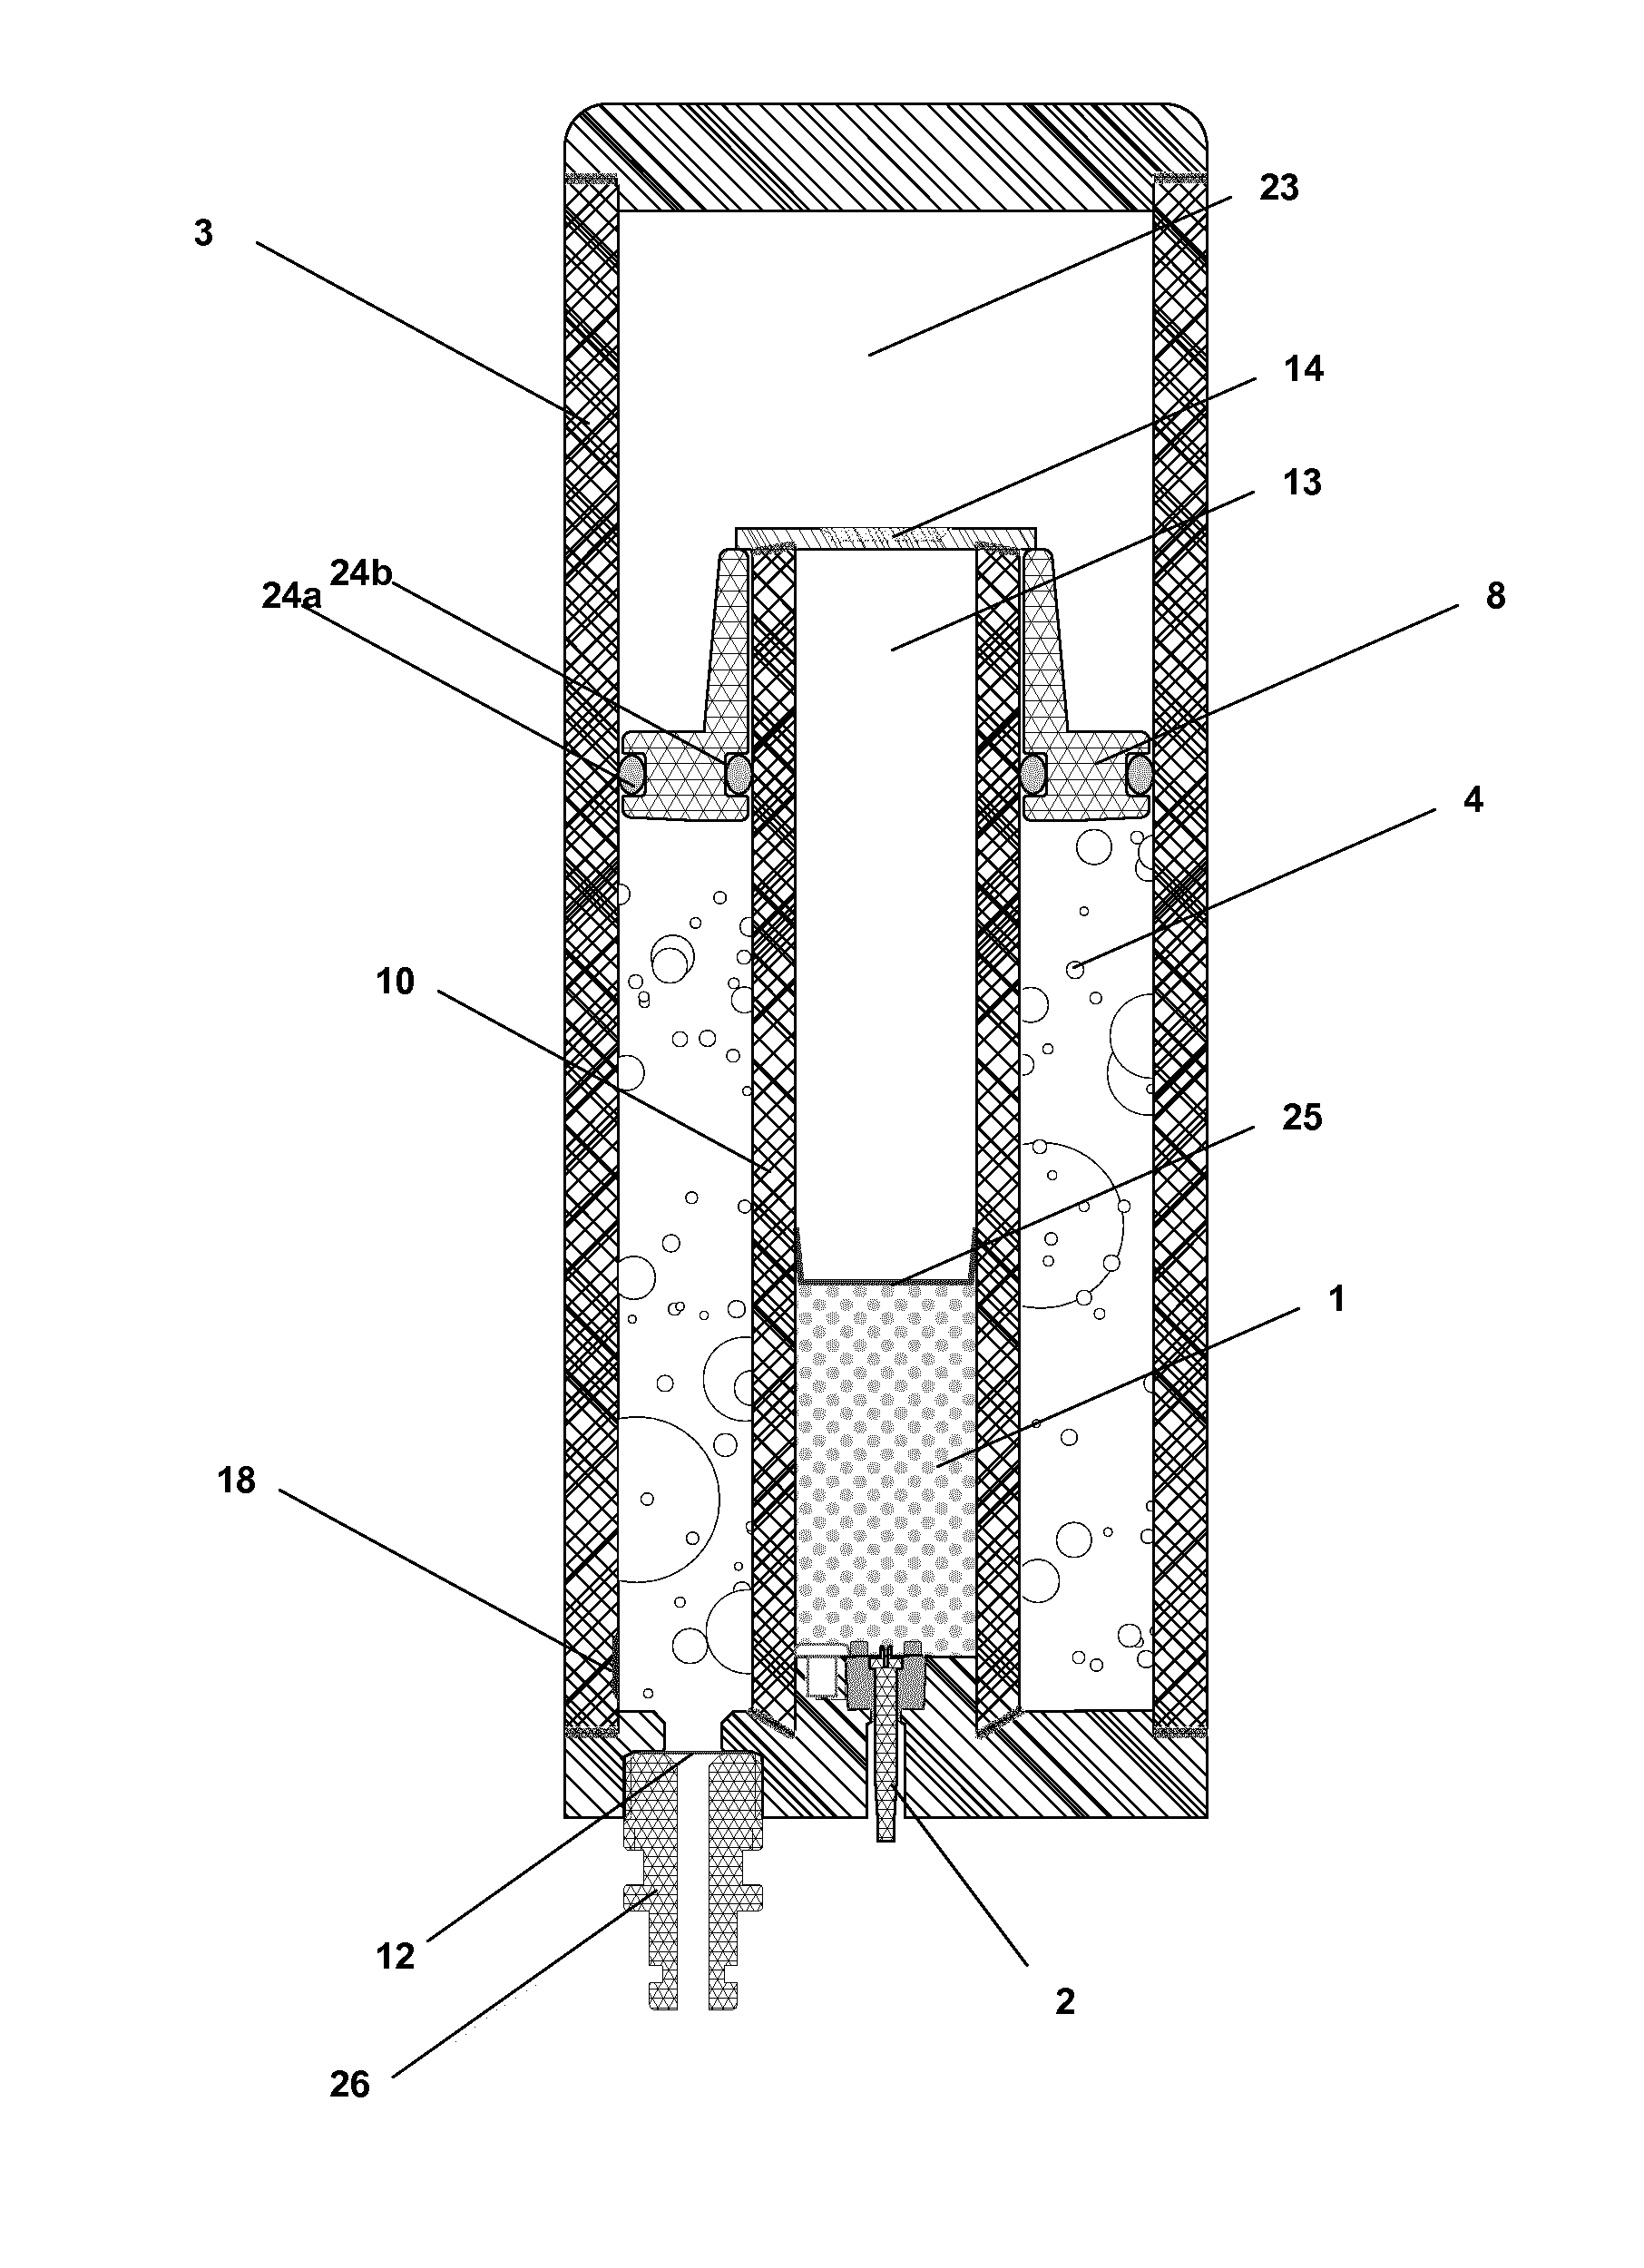 Fog-generating device comprising a reagent and ignition means